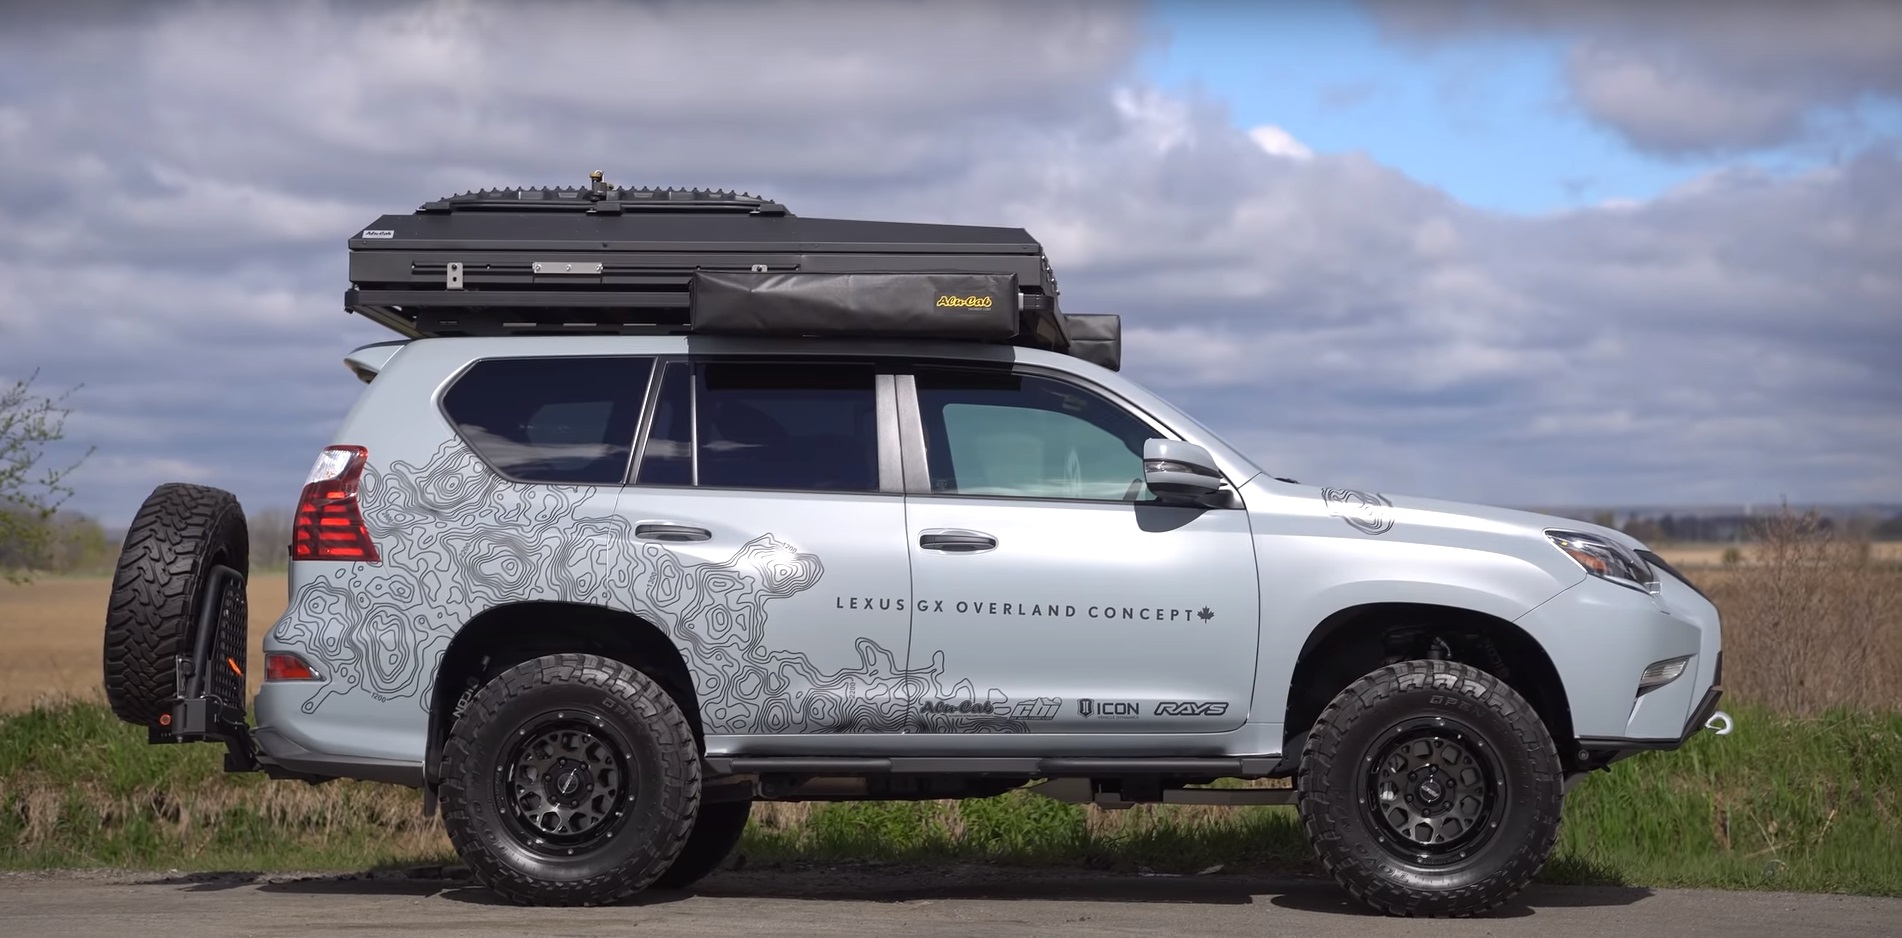 Lexus Gx 460 Overland Concept Is A Luxury Off Road Ready Rv Autoevolution